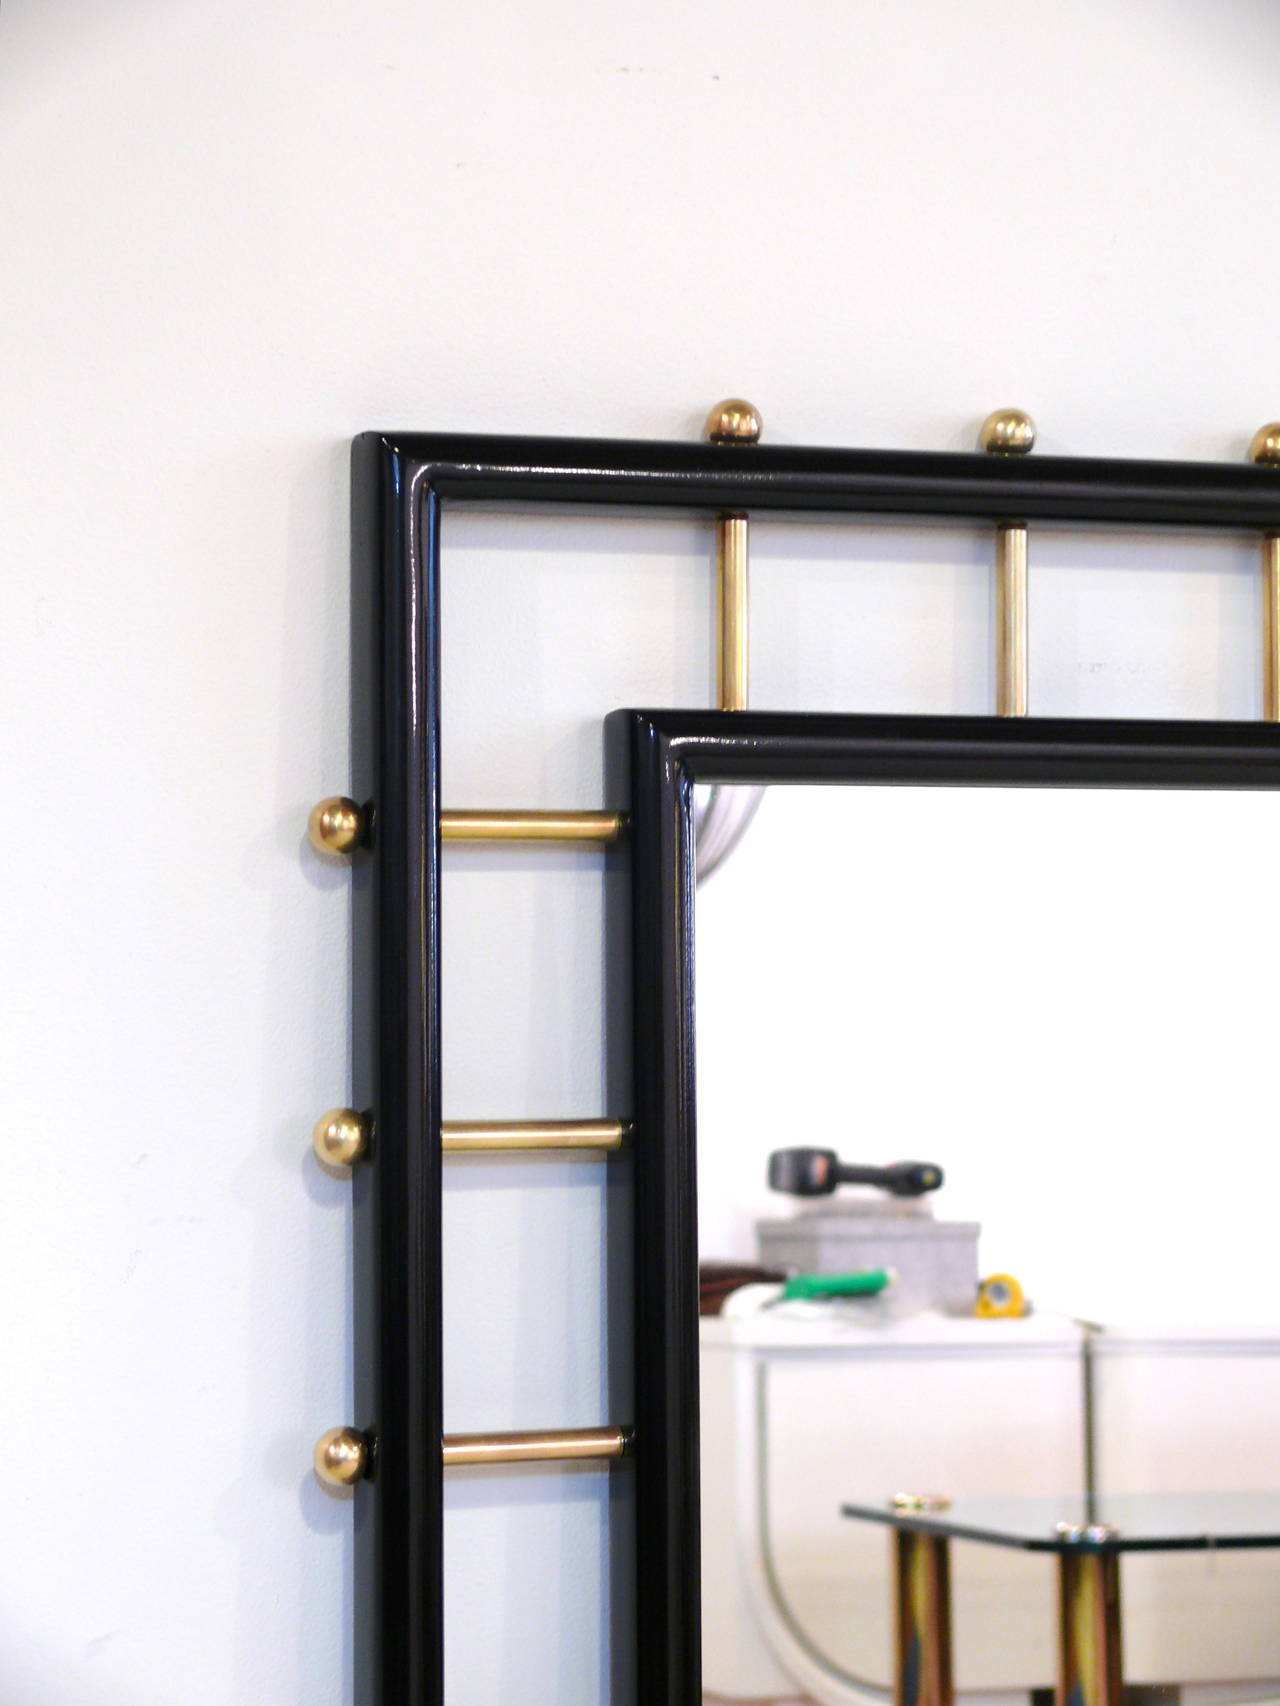 Spectacular Mid-Century Modern rectangular mirror. Multiple brass rods inserted around the middle framed mirror holding the outer frame with makes the mirror. Newly restored. Refinished in an ebonized color with a high gloss sheen. This mirror is